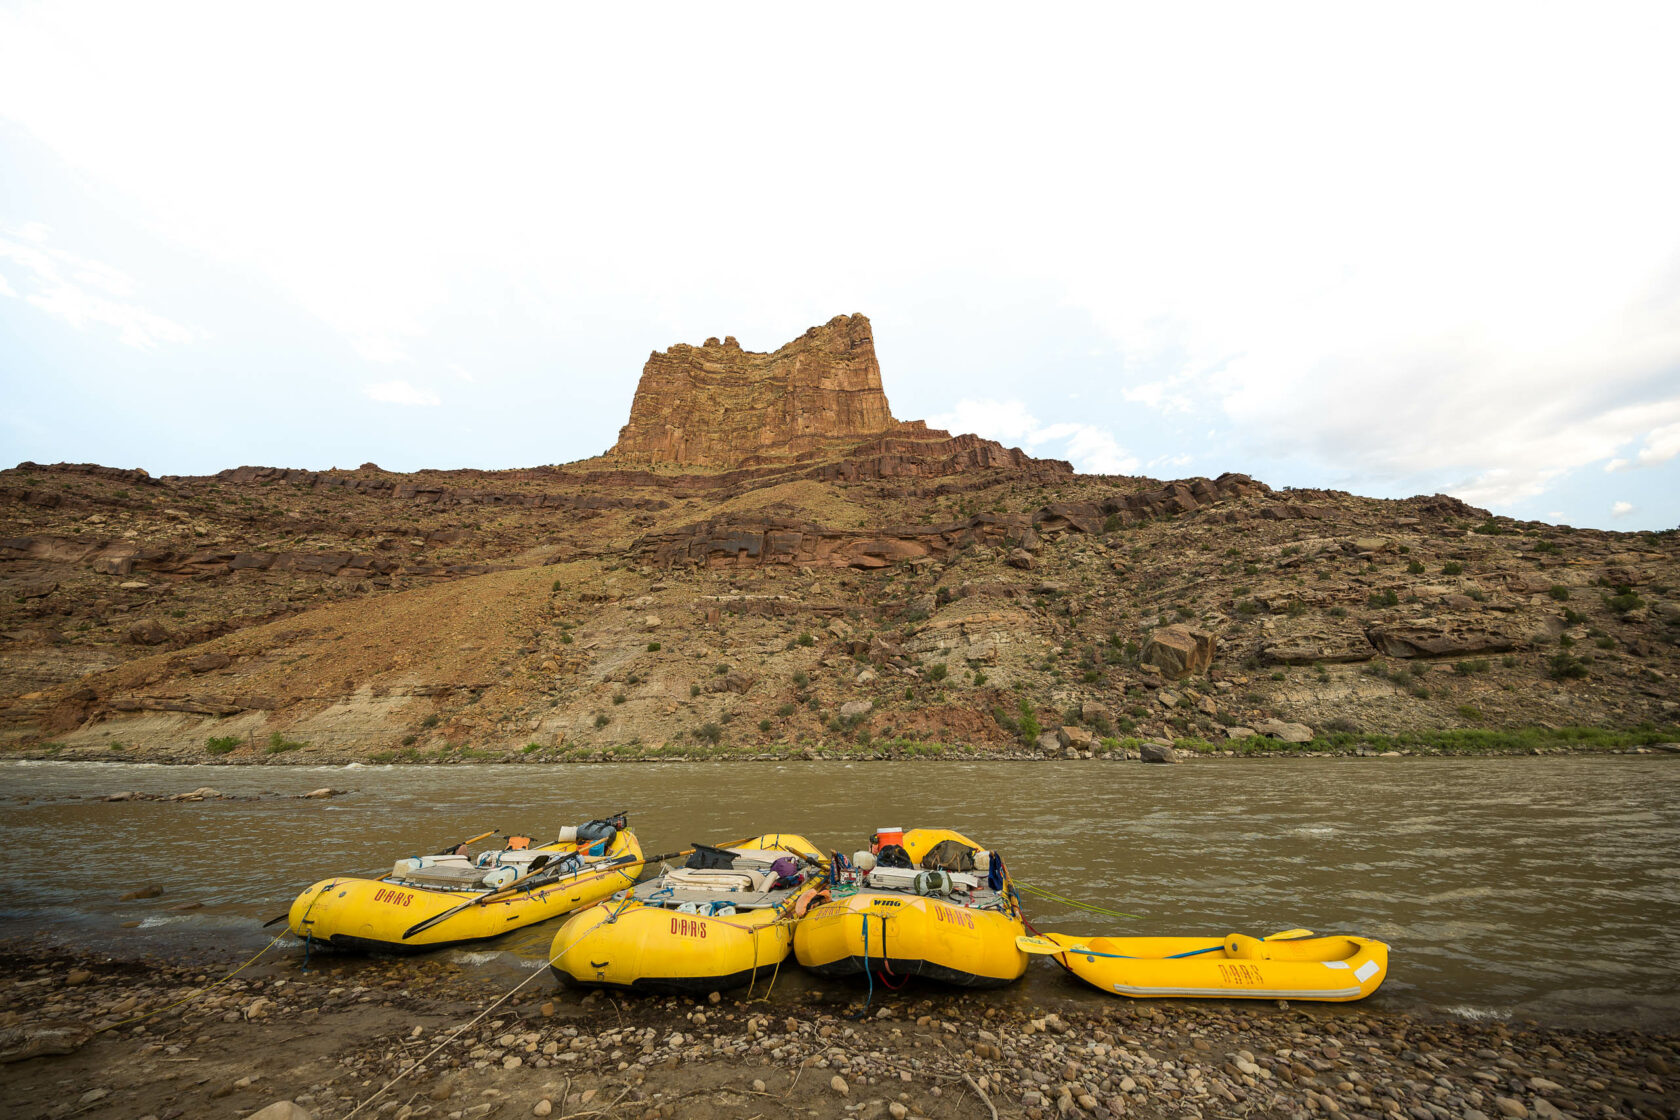 Rafts docked on the bank of the Green River.